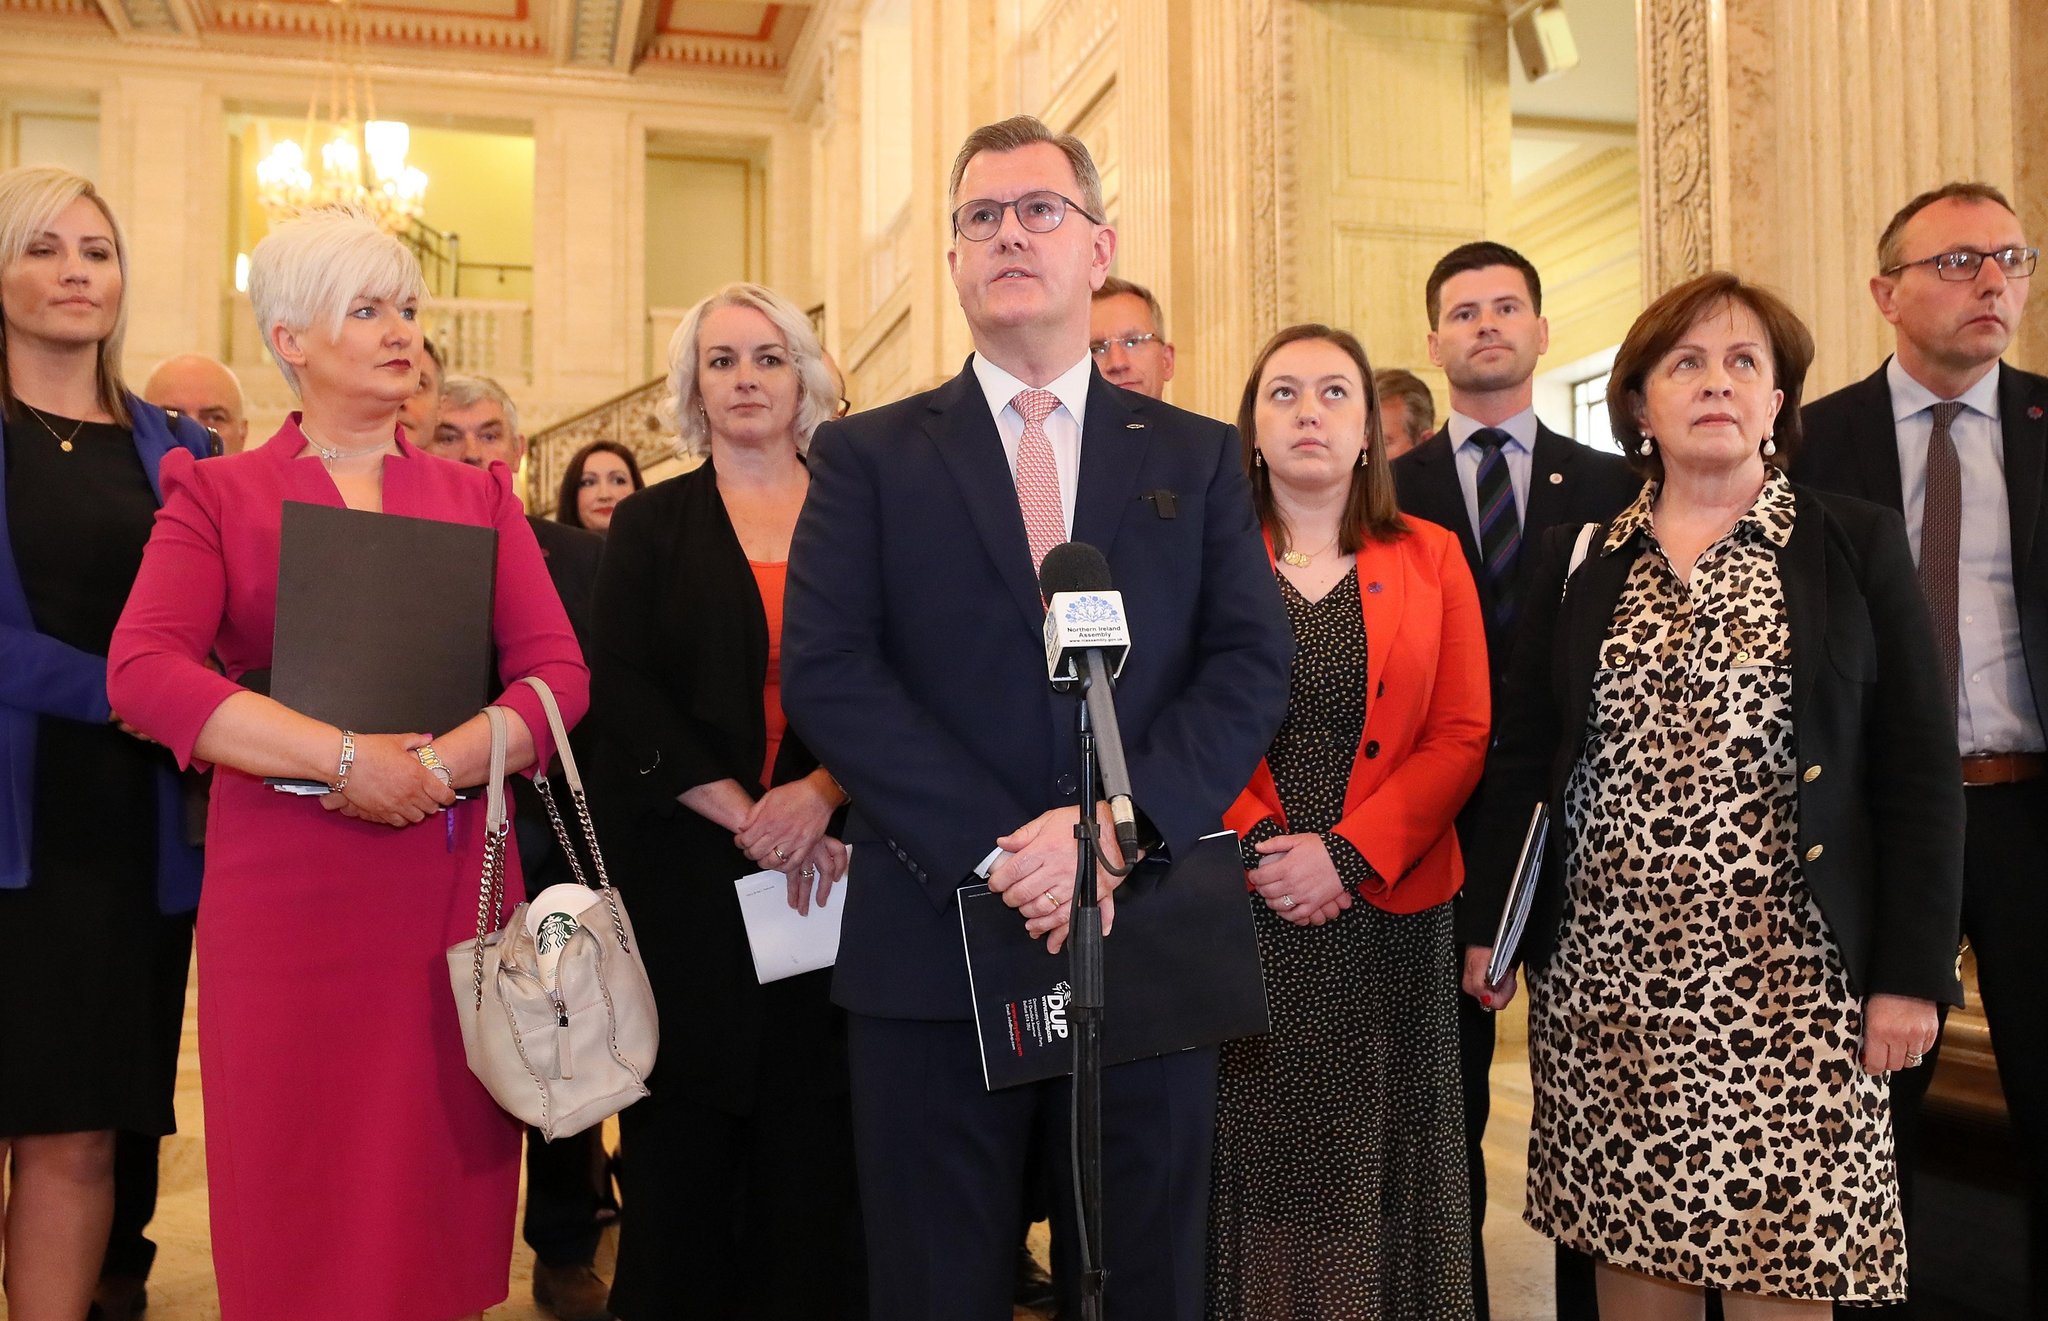 DUP leader defends decision to block election of new Assembly speaker